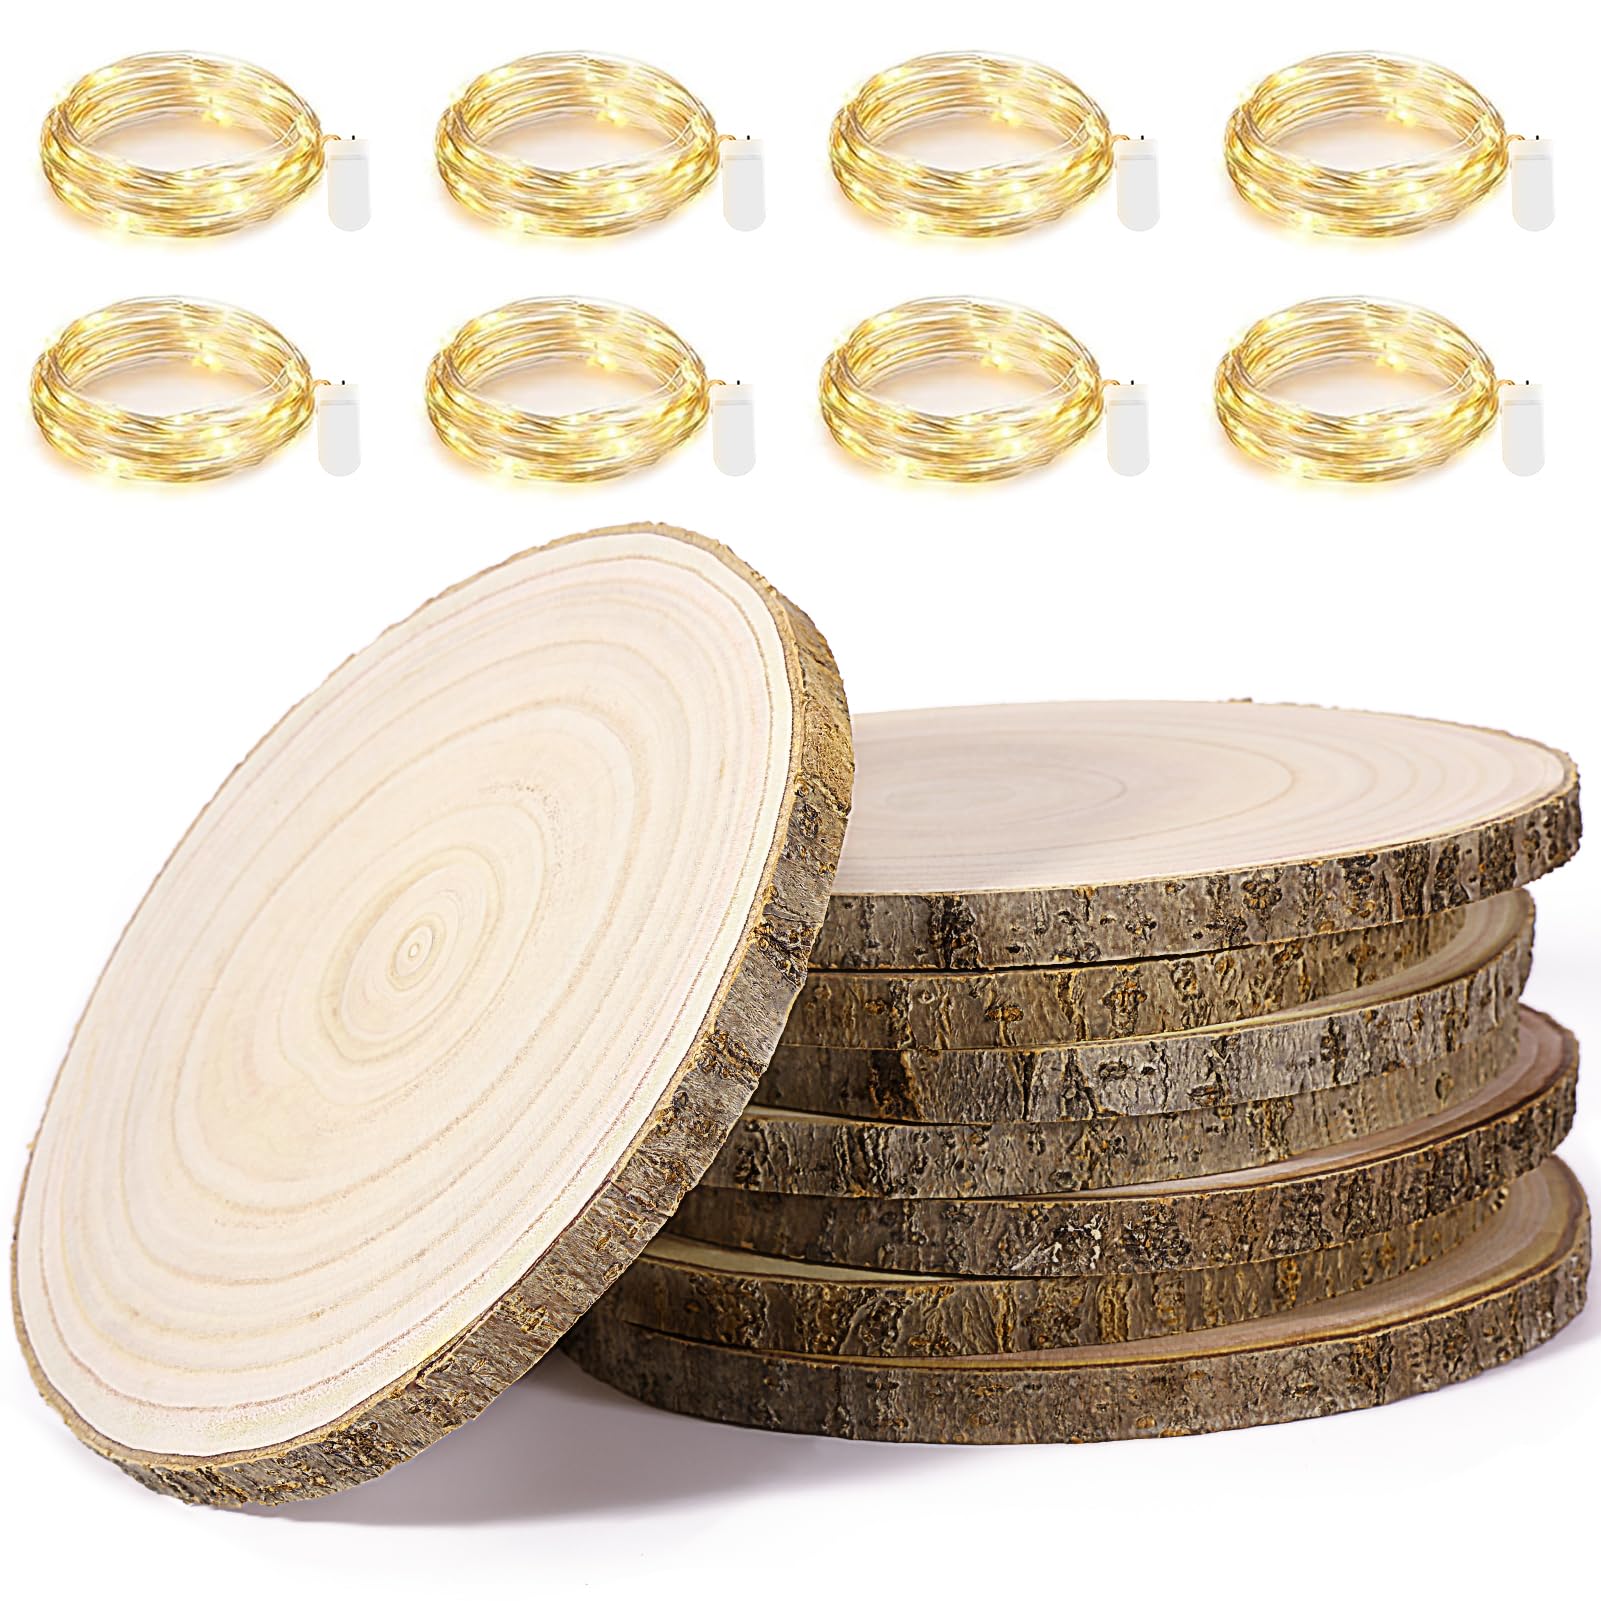 Set of 9-10 Inch Wood Slices for Centerpieces Large Wood Slices, Wood Rounds,  Wood Slice Centerpieces, Center Pieces for Tables 